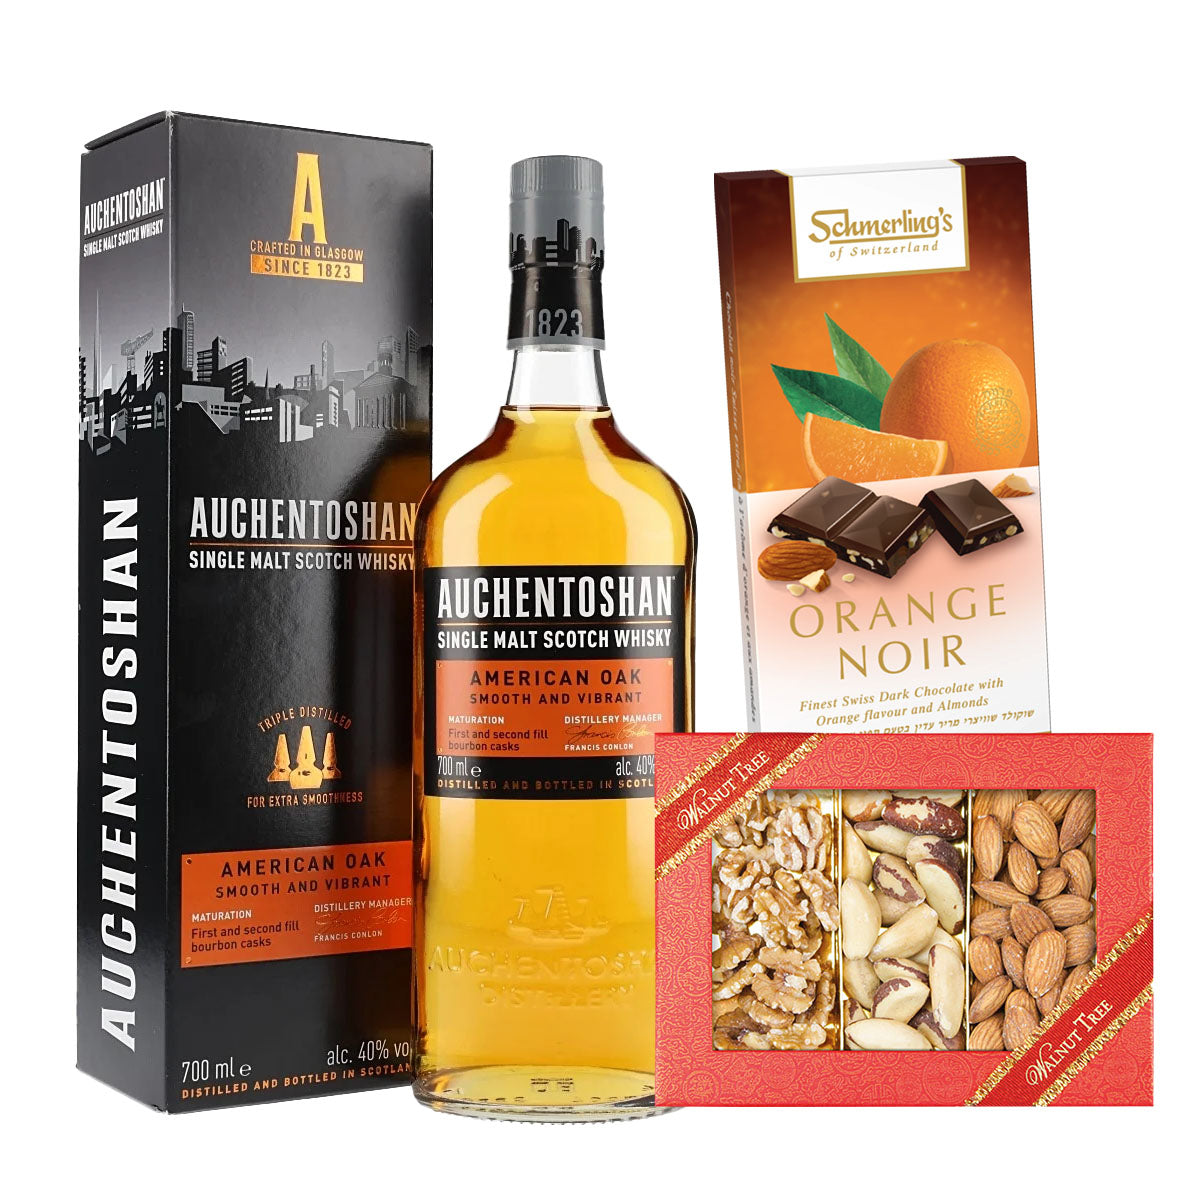 The spirit of good health: Auchentoshan Whisky, Nuts & Chocolate ‘Gesundheit’ Gift Set. Don’t say ‘Atishoo,’ say Auchentoshan!  Wish them Gesundheit, good health with this classic gift set, just perfect for the whisky lover in your life.